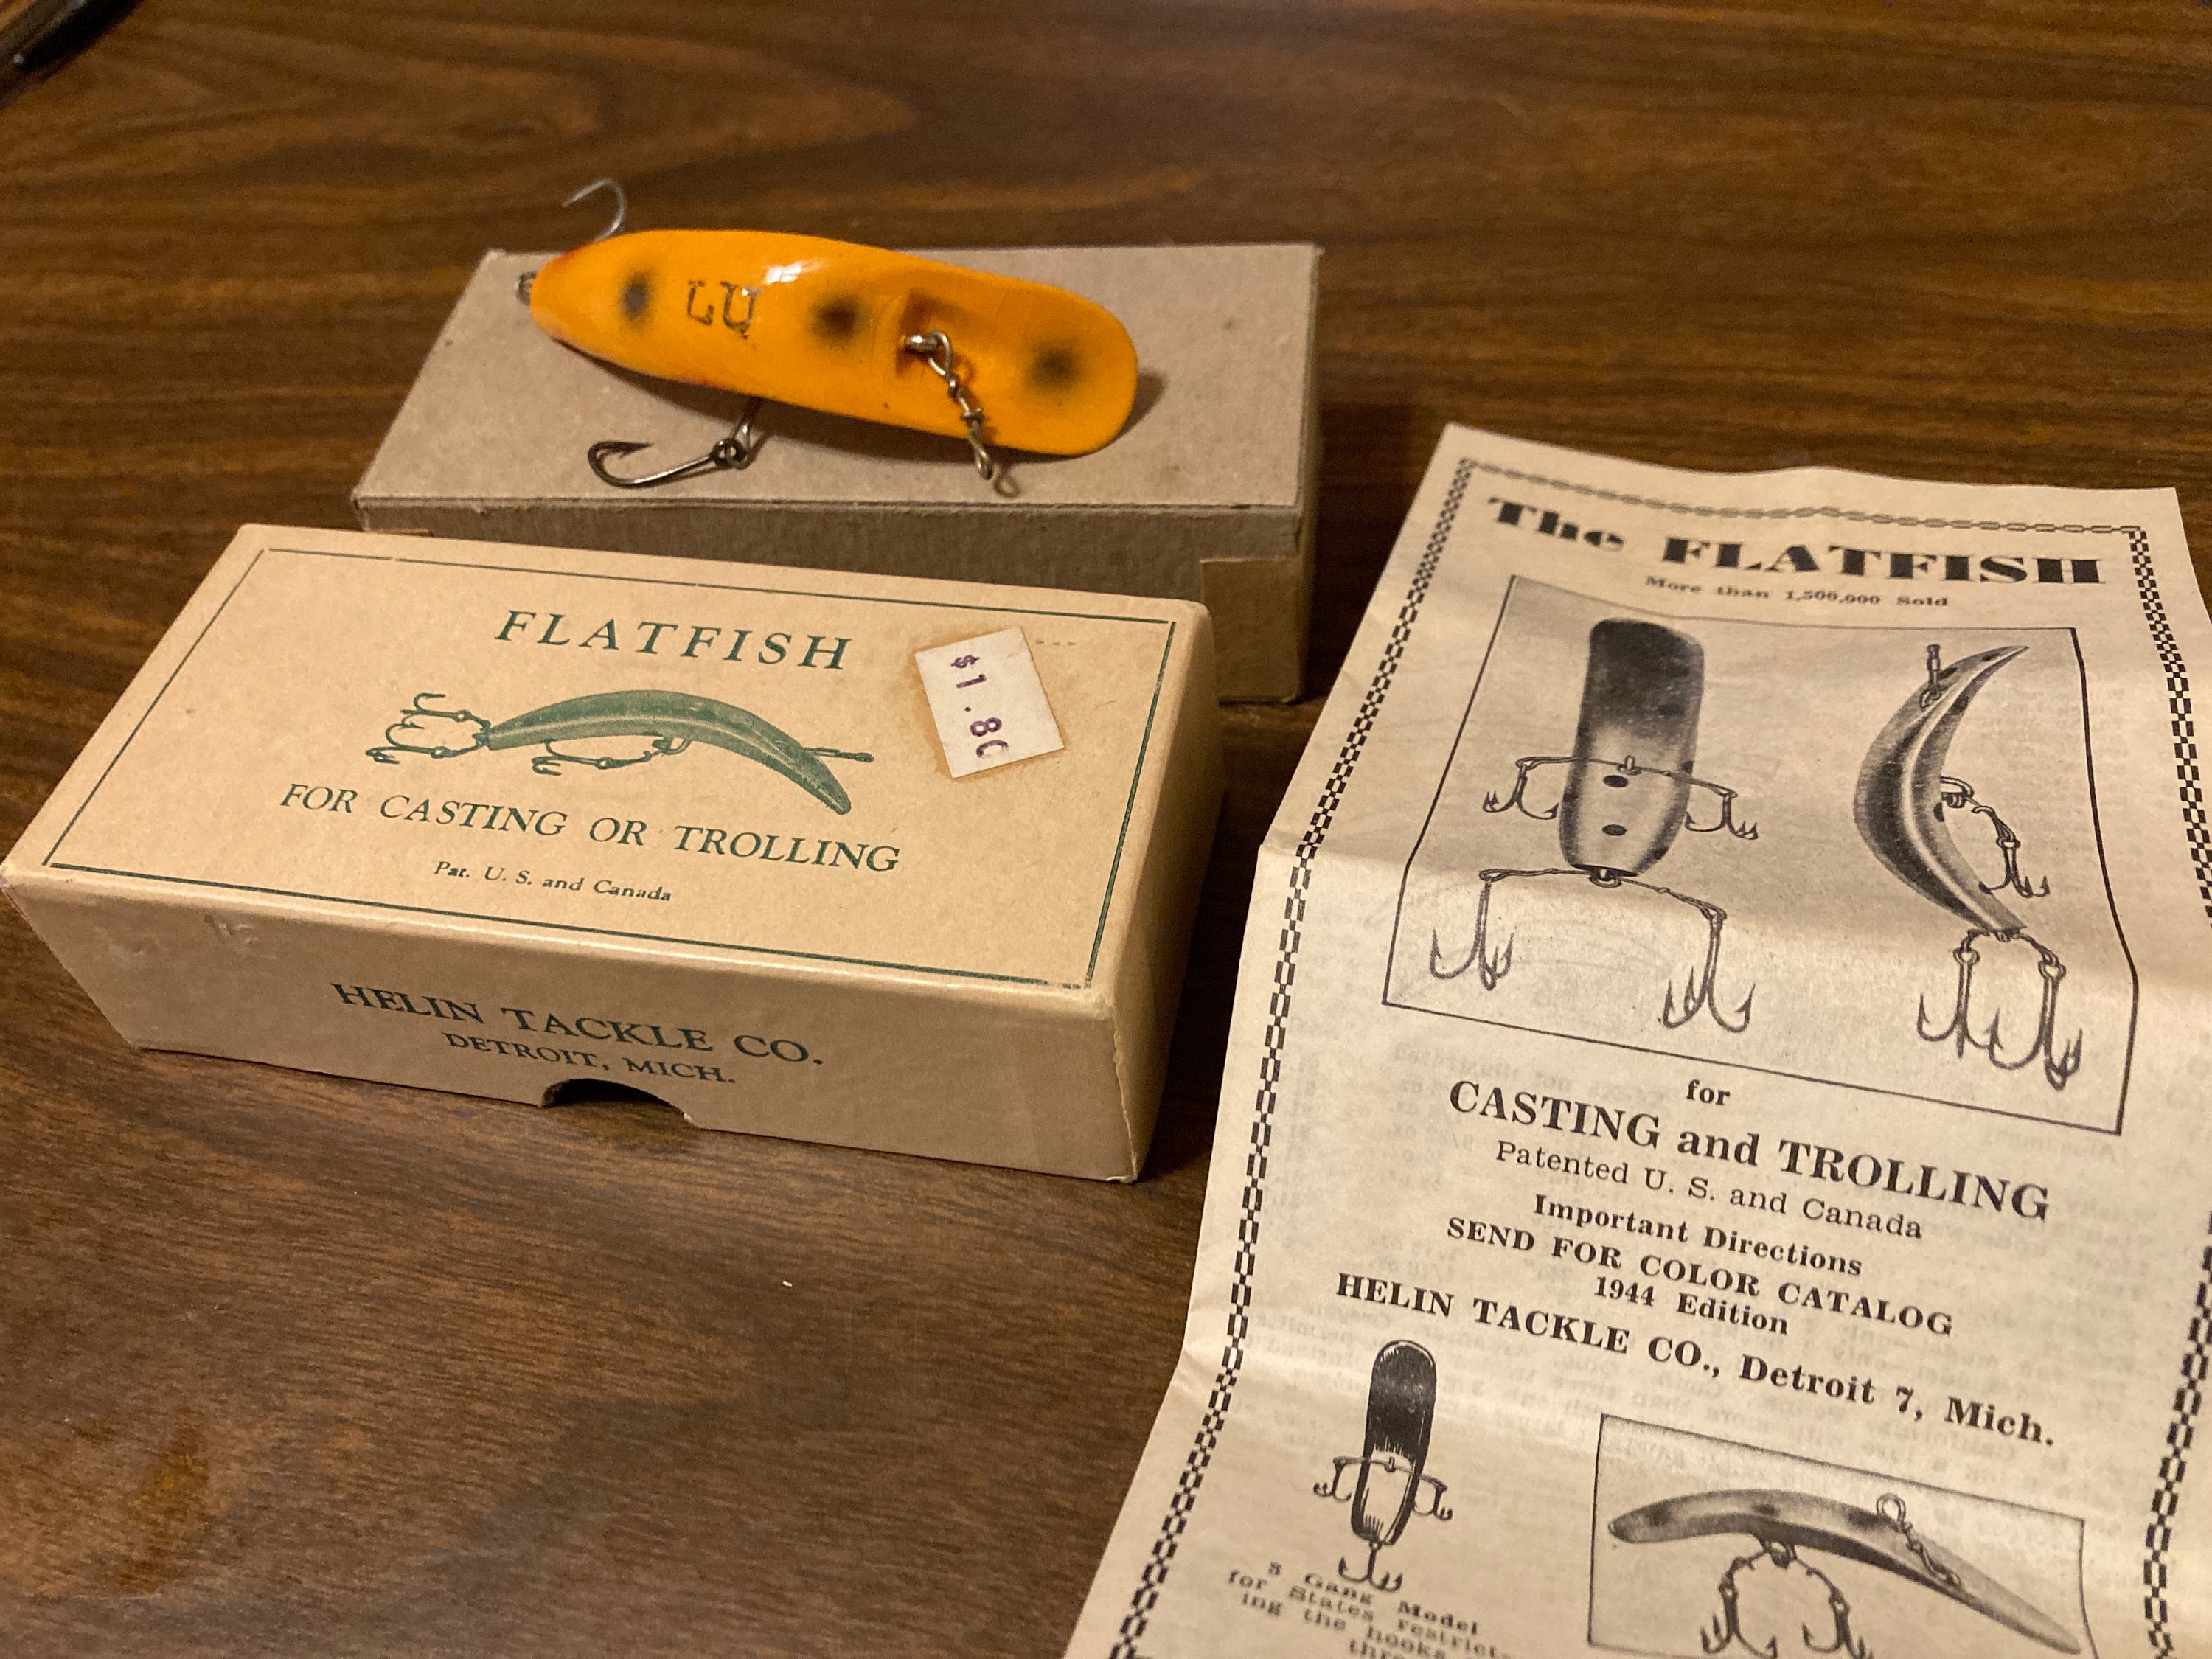 Rare Vintage, Collectible, Fishing, Lure in Original Box and With Papers.  NLU Model With LO Colors. Beautiful Detroit Helen Flat Fish Lure 